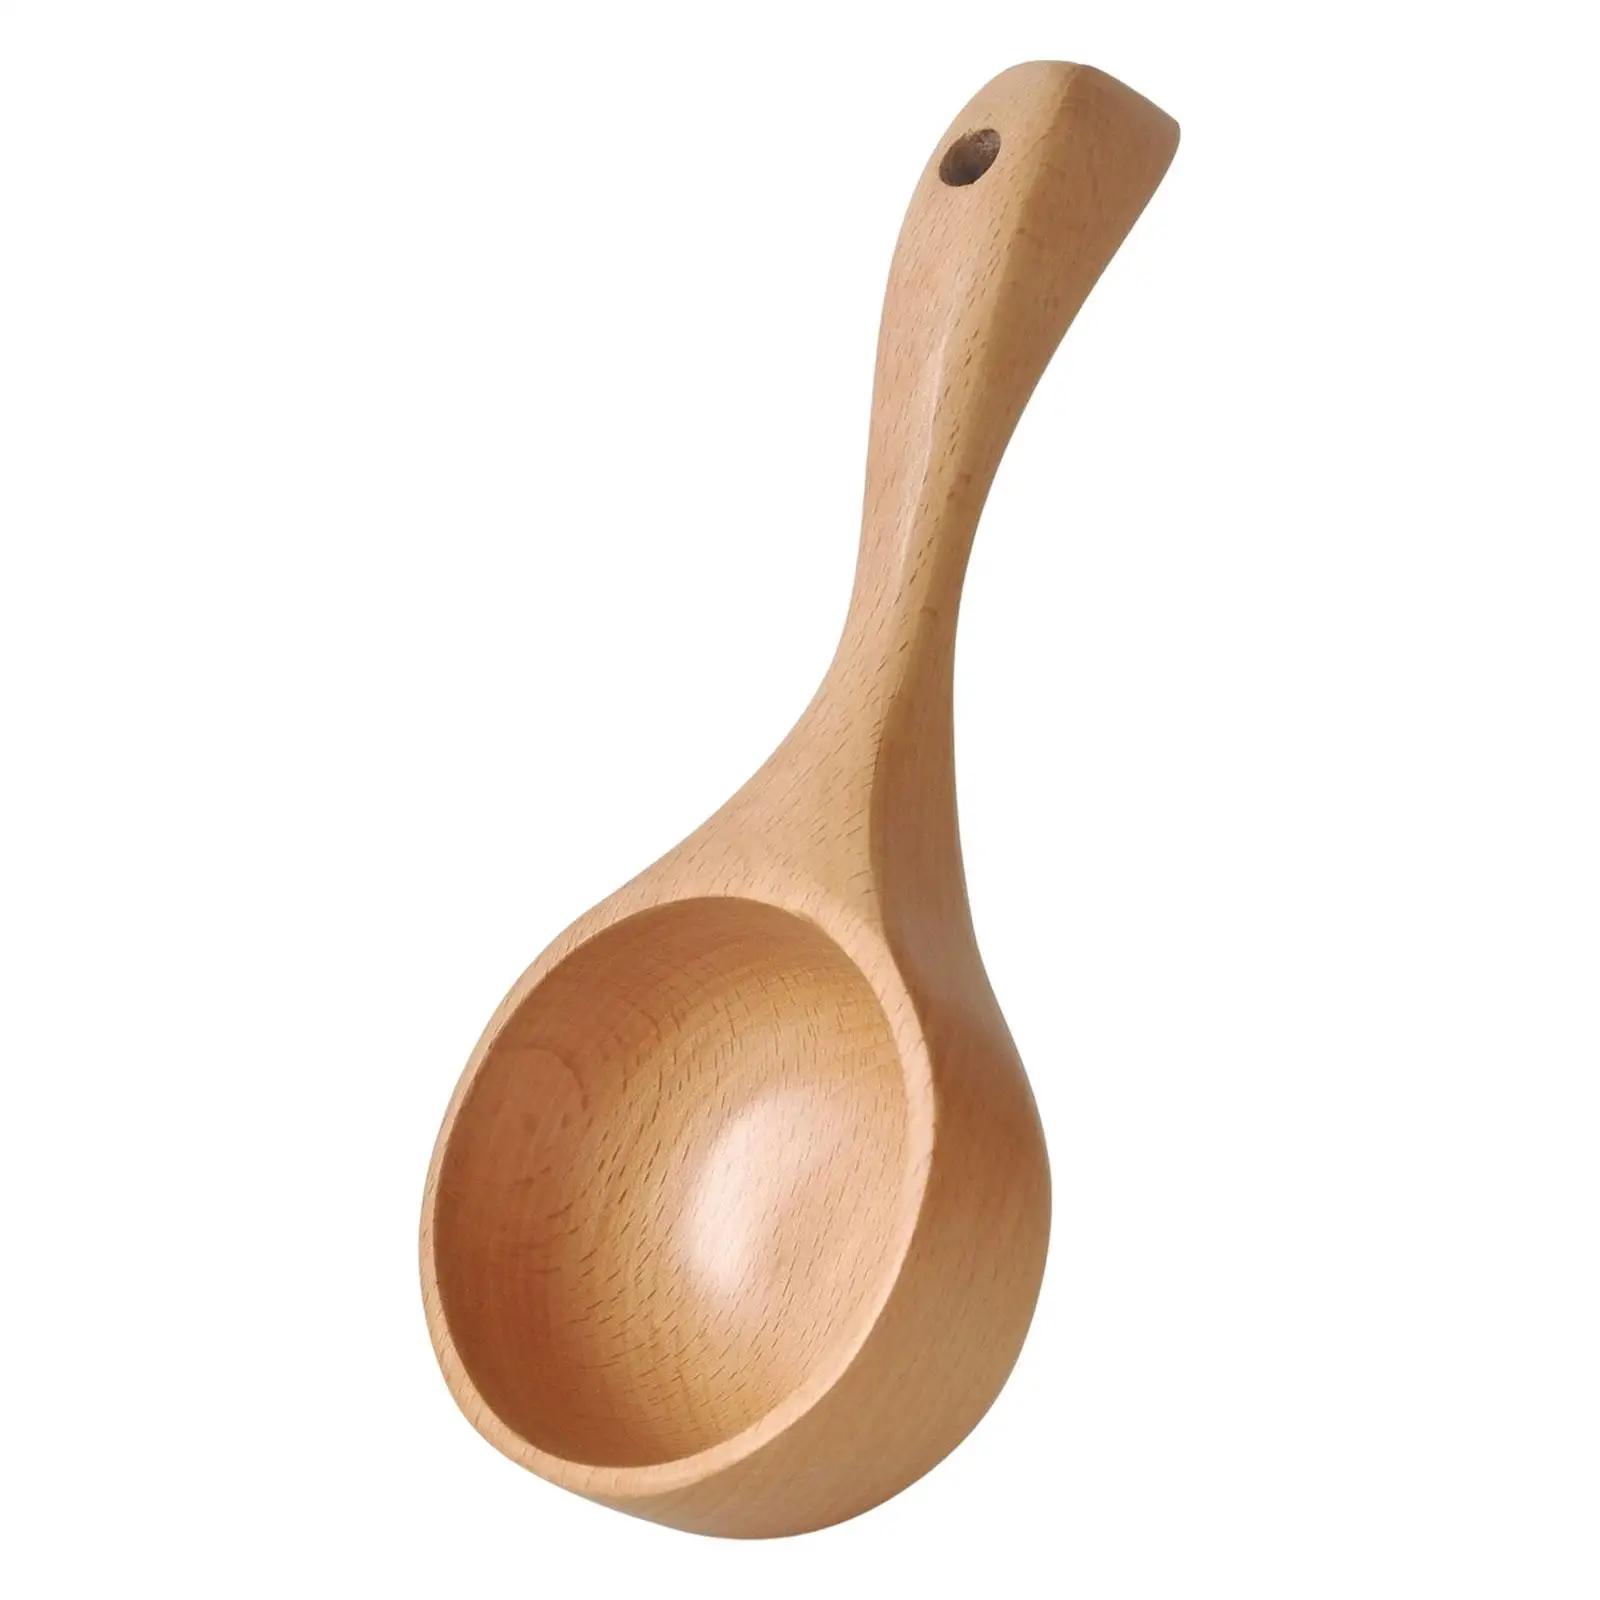 Multipurpose Wooden Ladle Spoon Tableware Handmade Serving Soup Tablespoon for Sauna Canisters Flour Cooking Porridge Rice